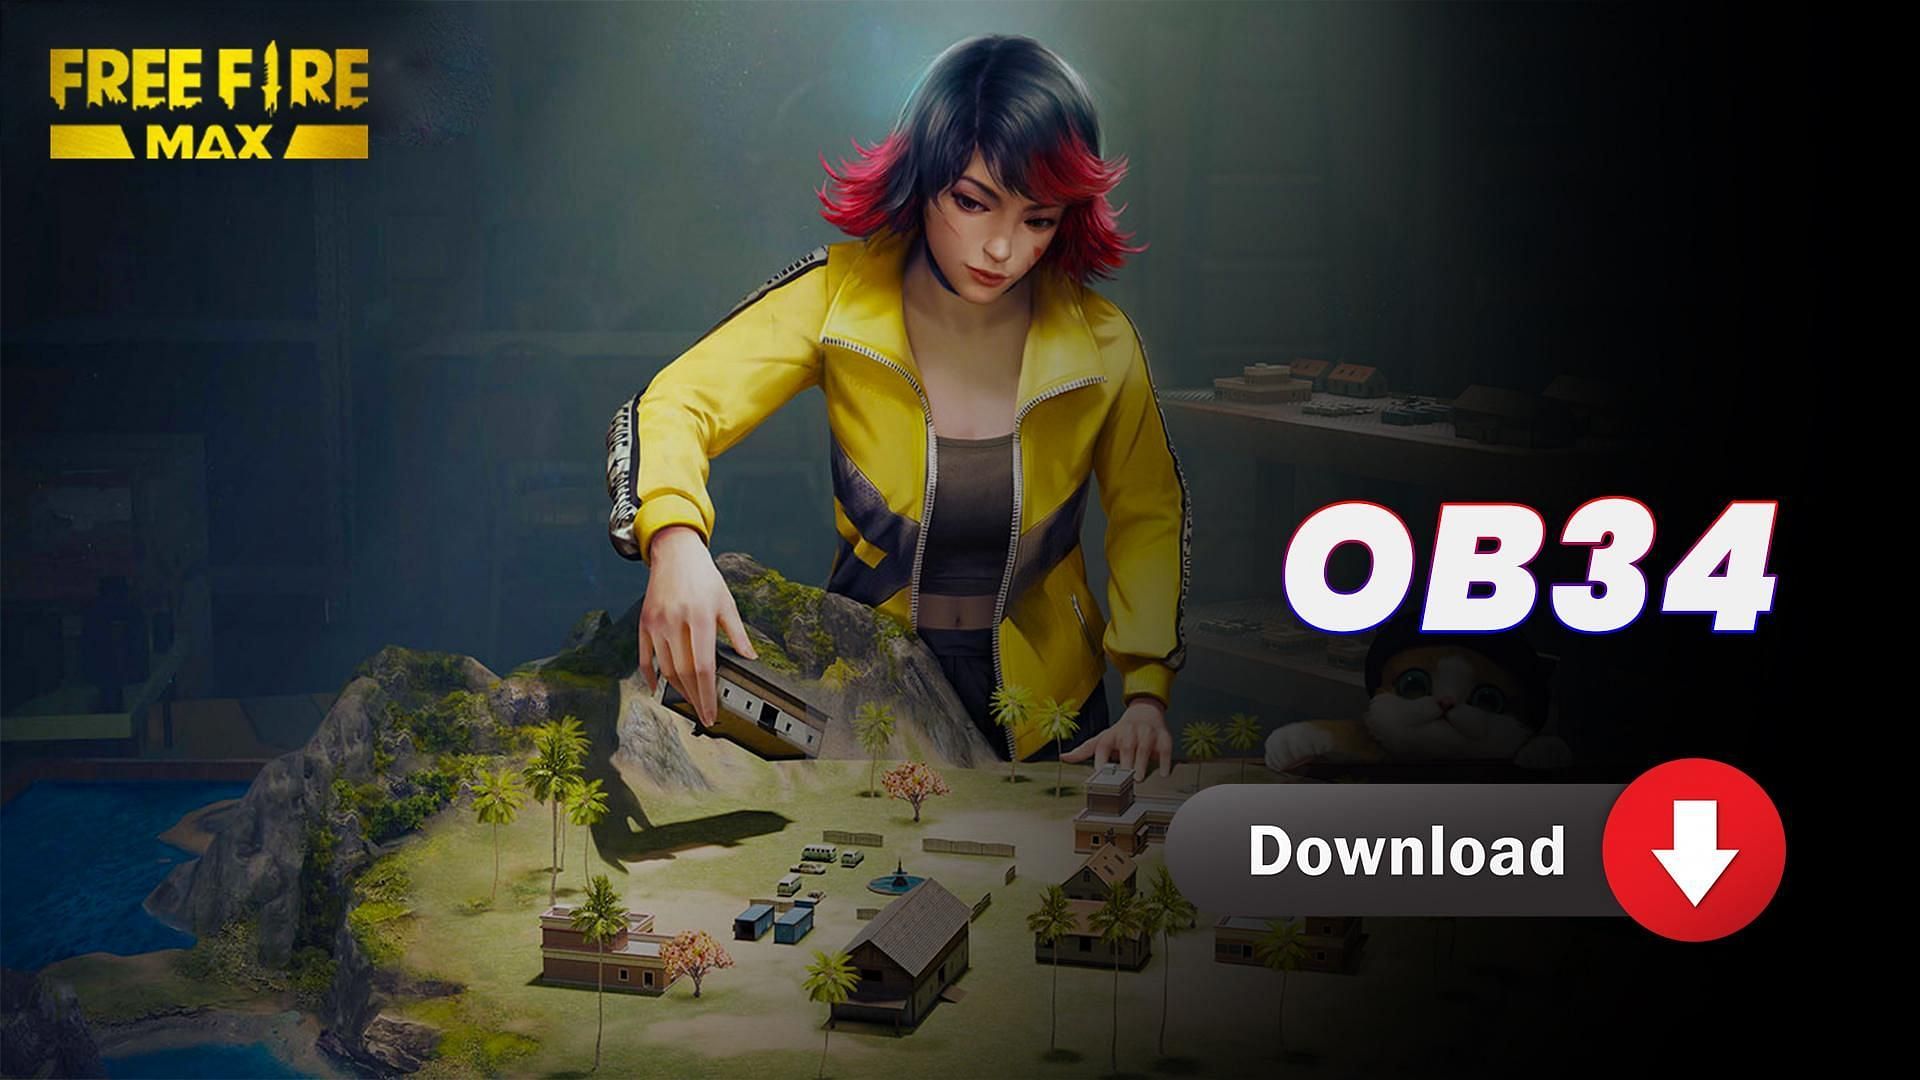 How to download Free Fire MAX OB34 update on Android in India